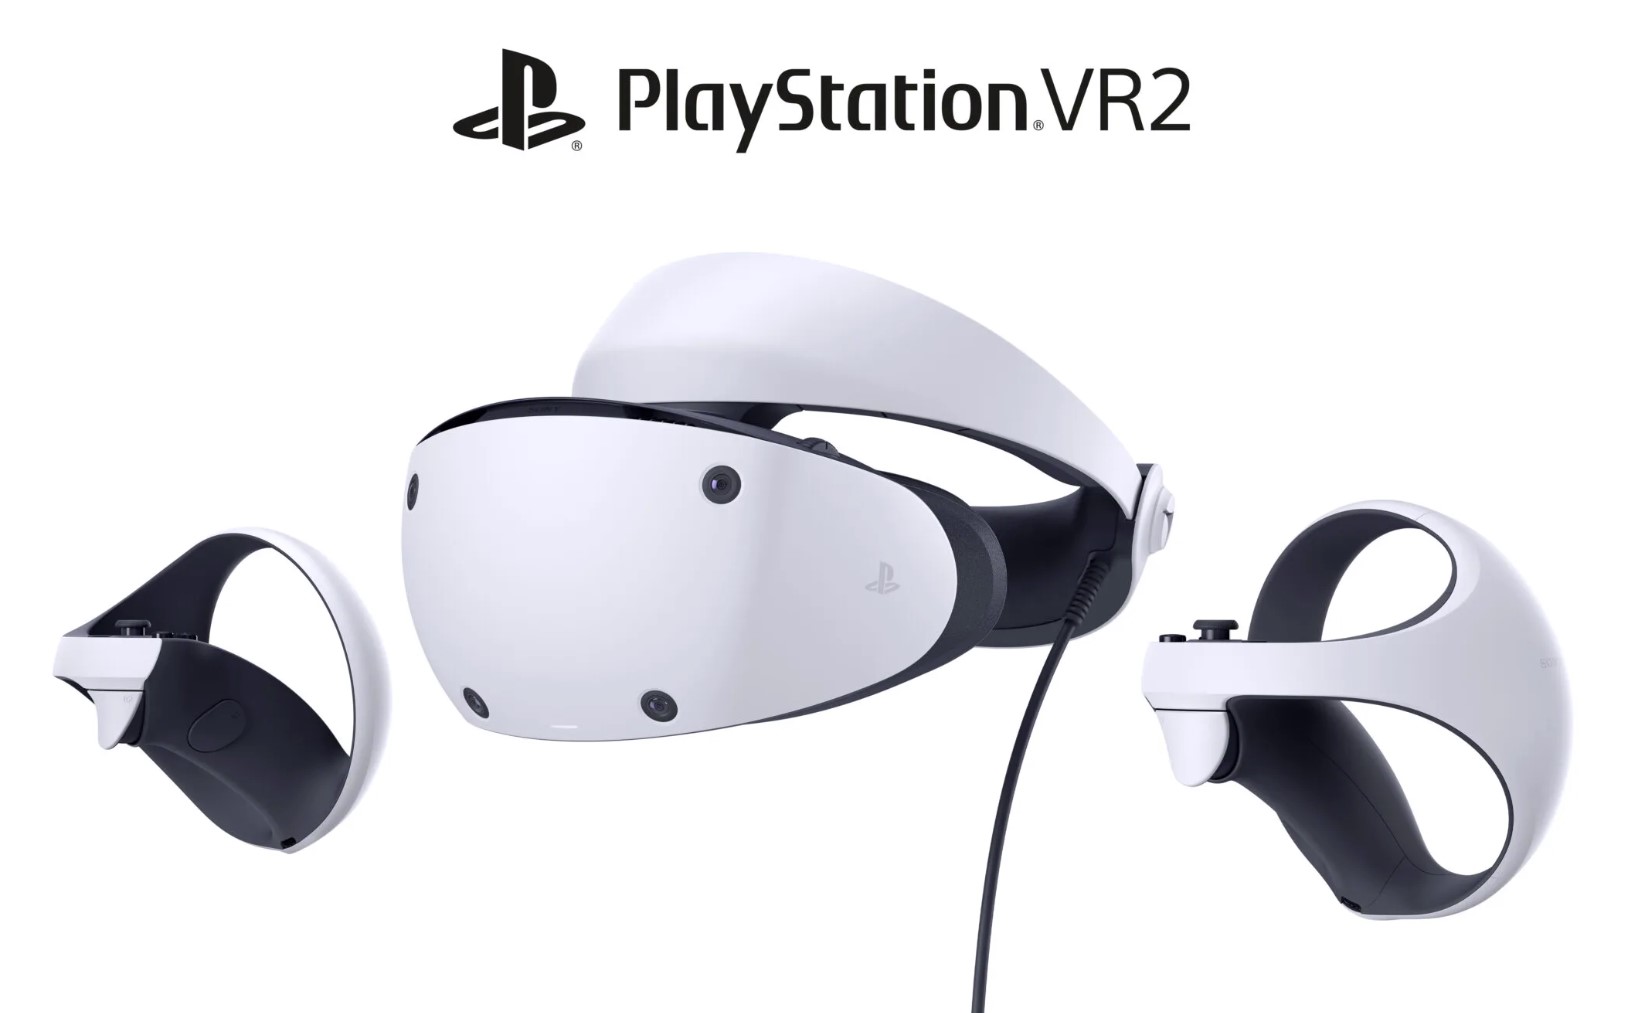 PlayStation State of Play returns next week with PS VR2 gaming news and more